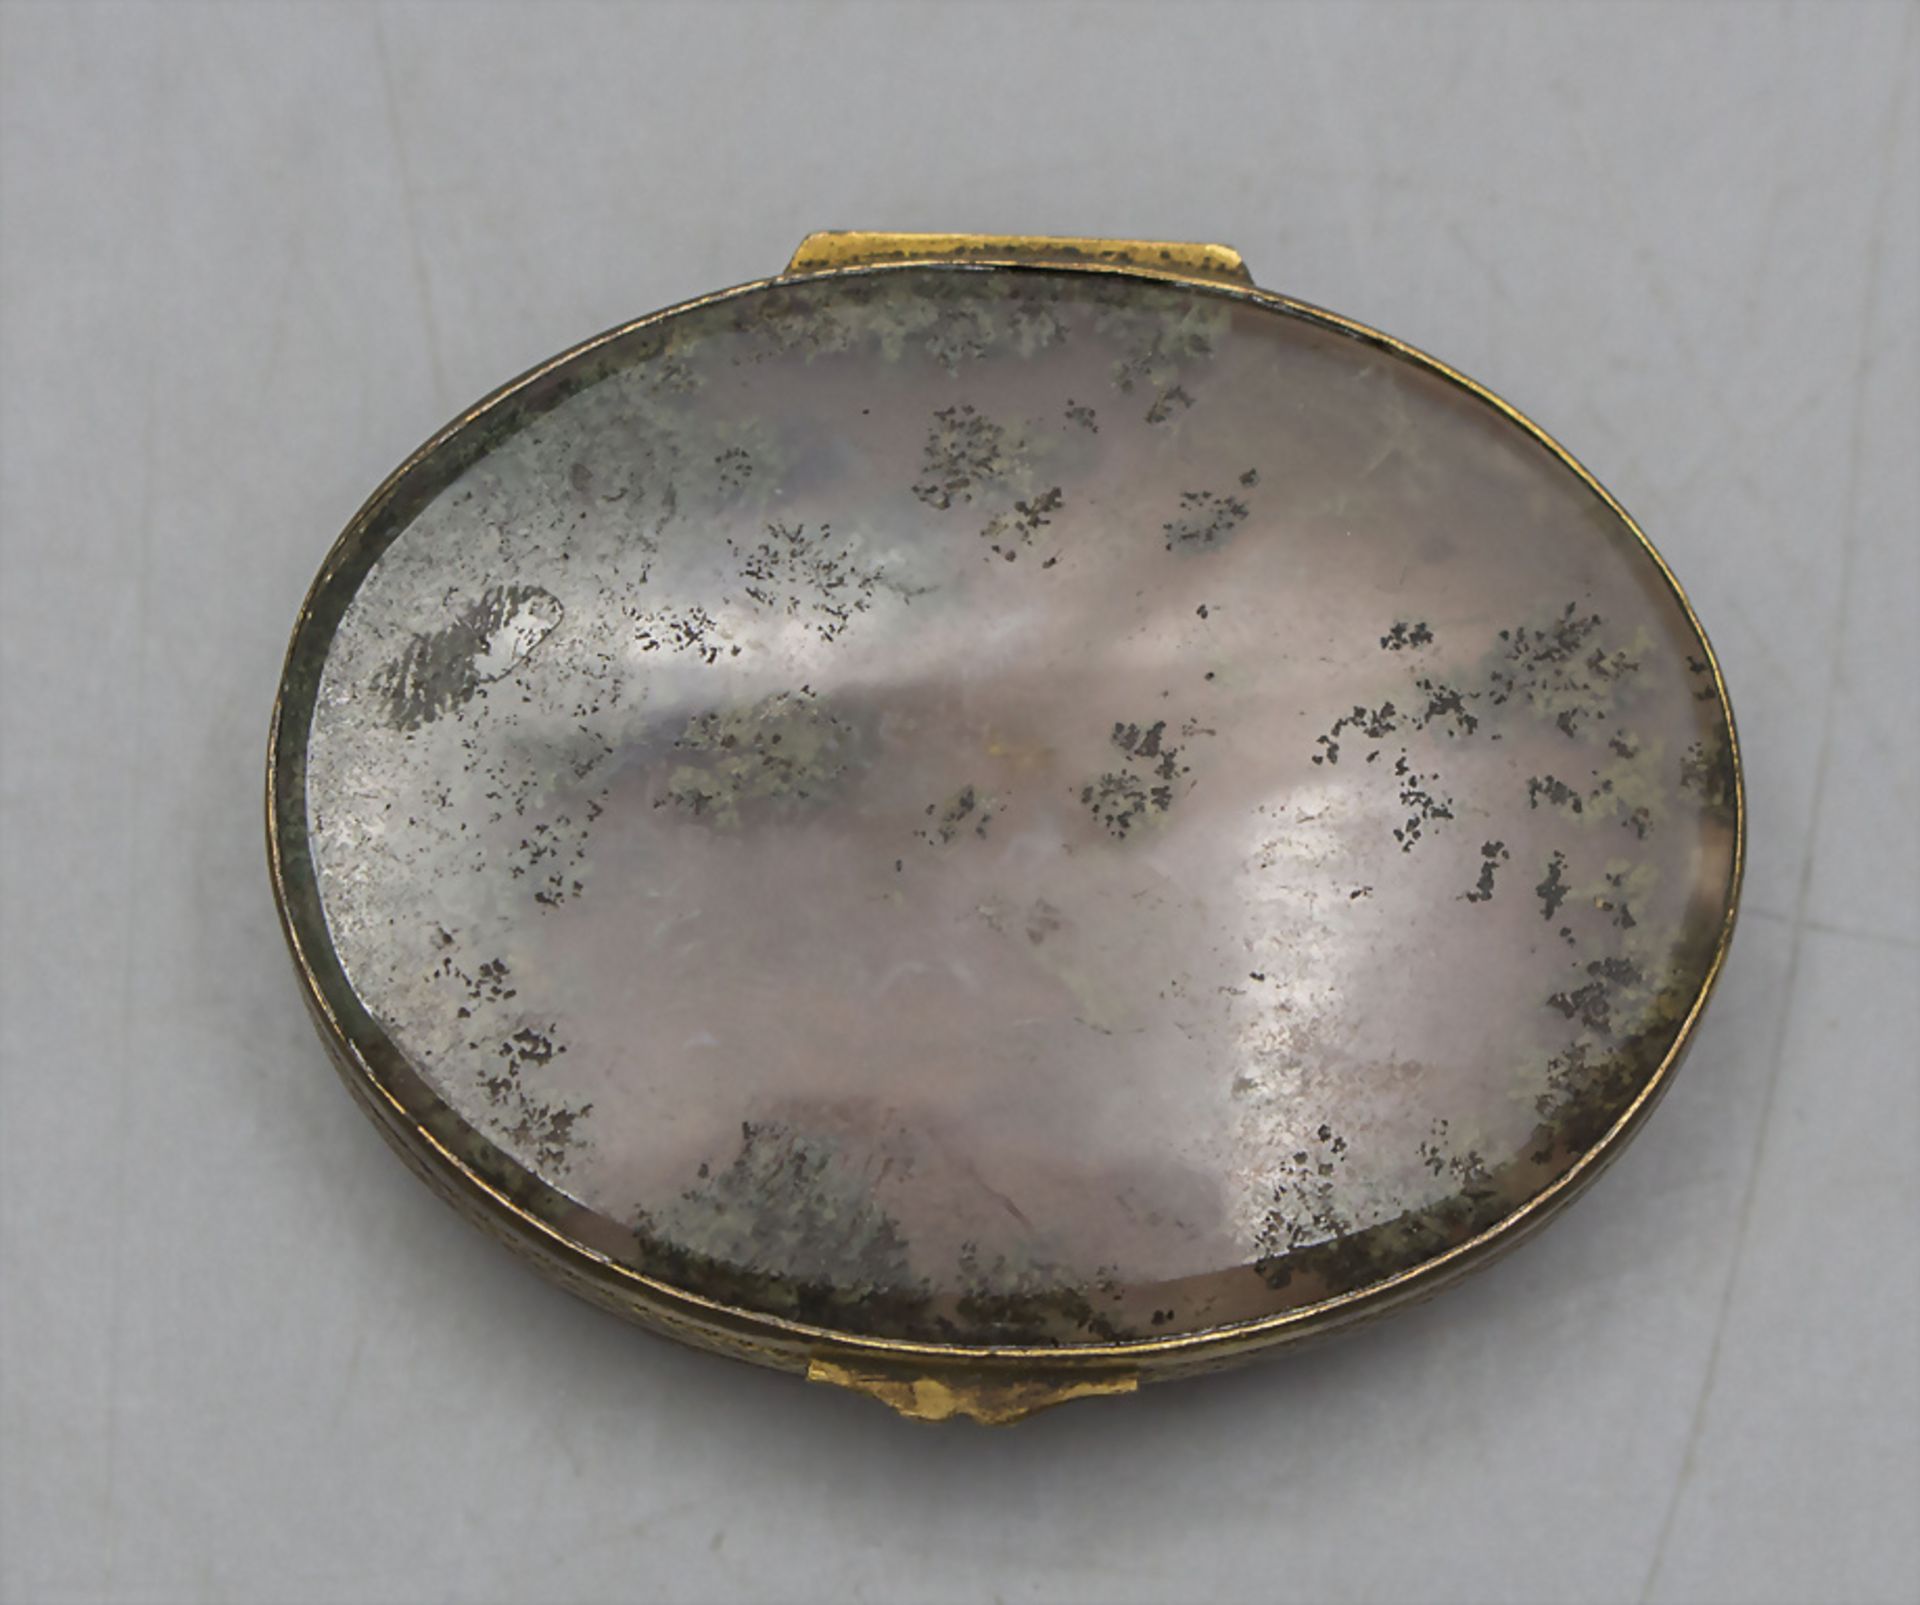 Ovale Achat Deckeldose / Tabatiere / An oval agate snuffbox, Frankreich, Ende 19. Jh. - Image 2 of 5